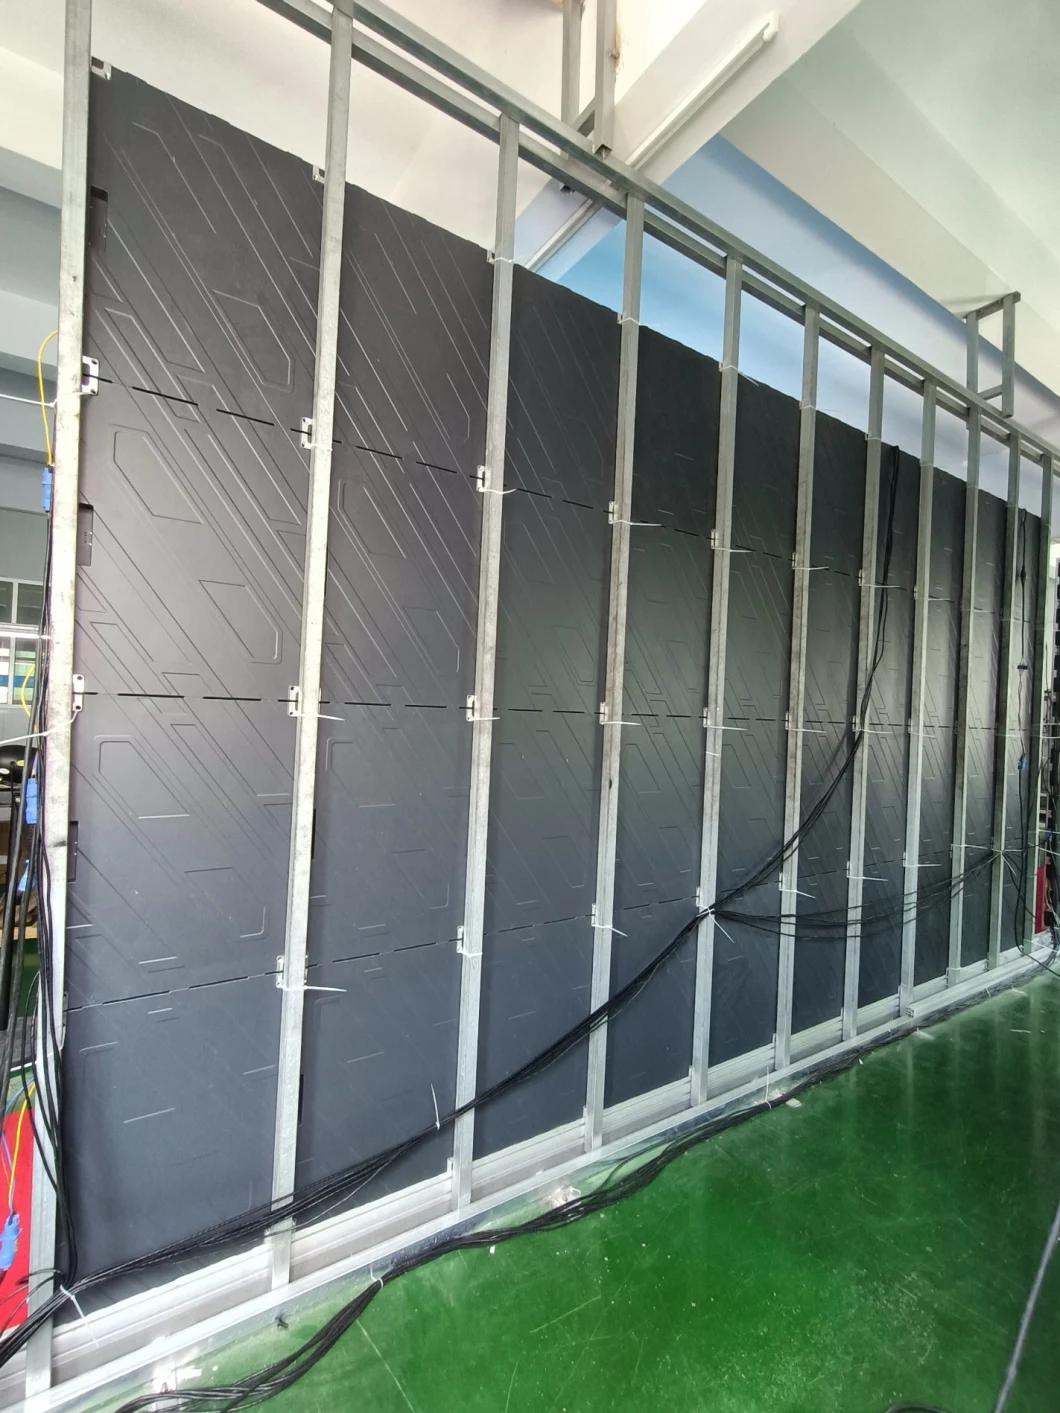 P2.5mm Front Service Indoor Fine Pitch LED Display Screen 640mm X 480mm